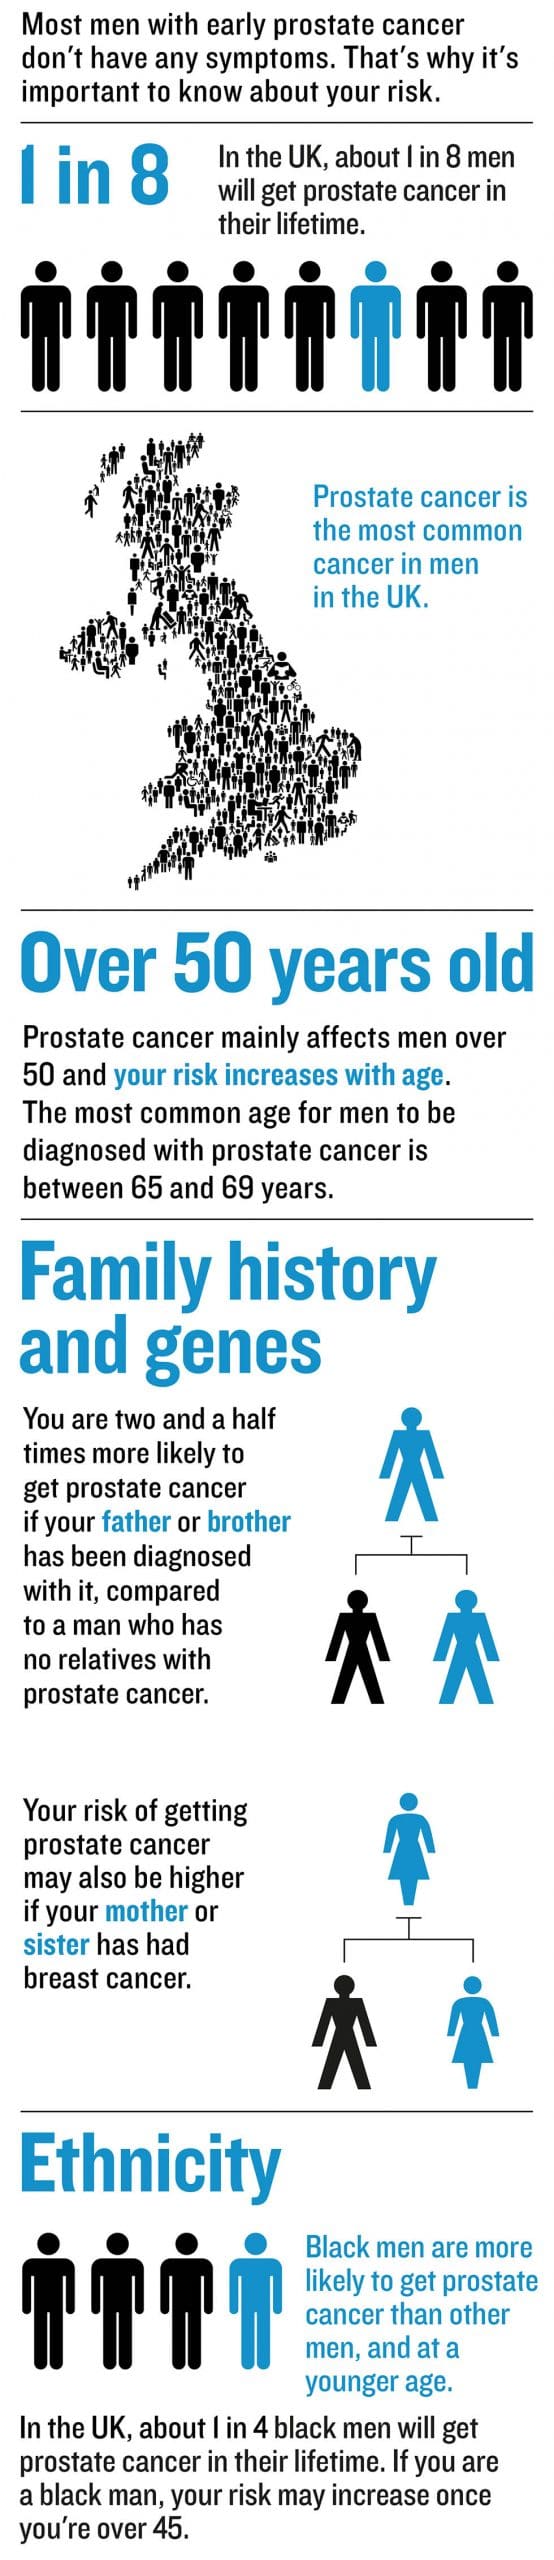 Infographic about Prostate cancer